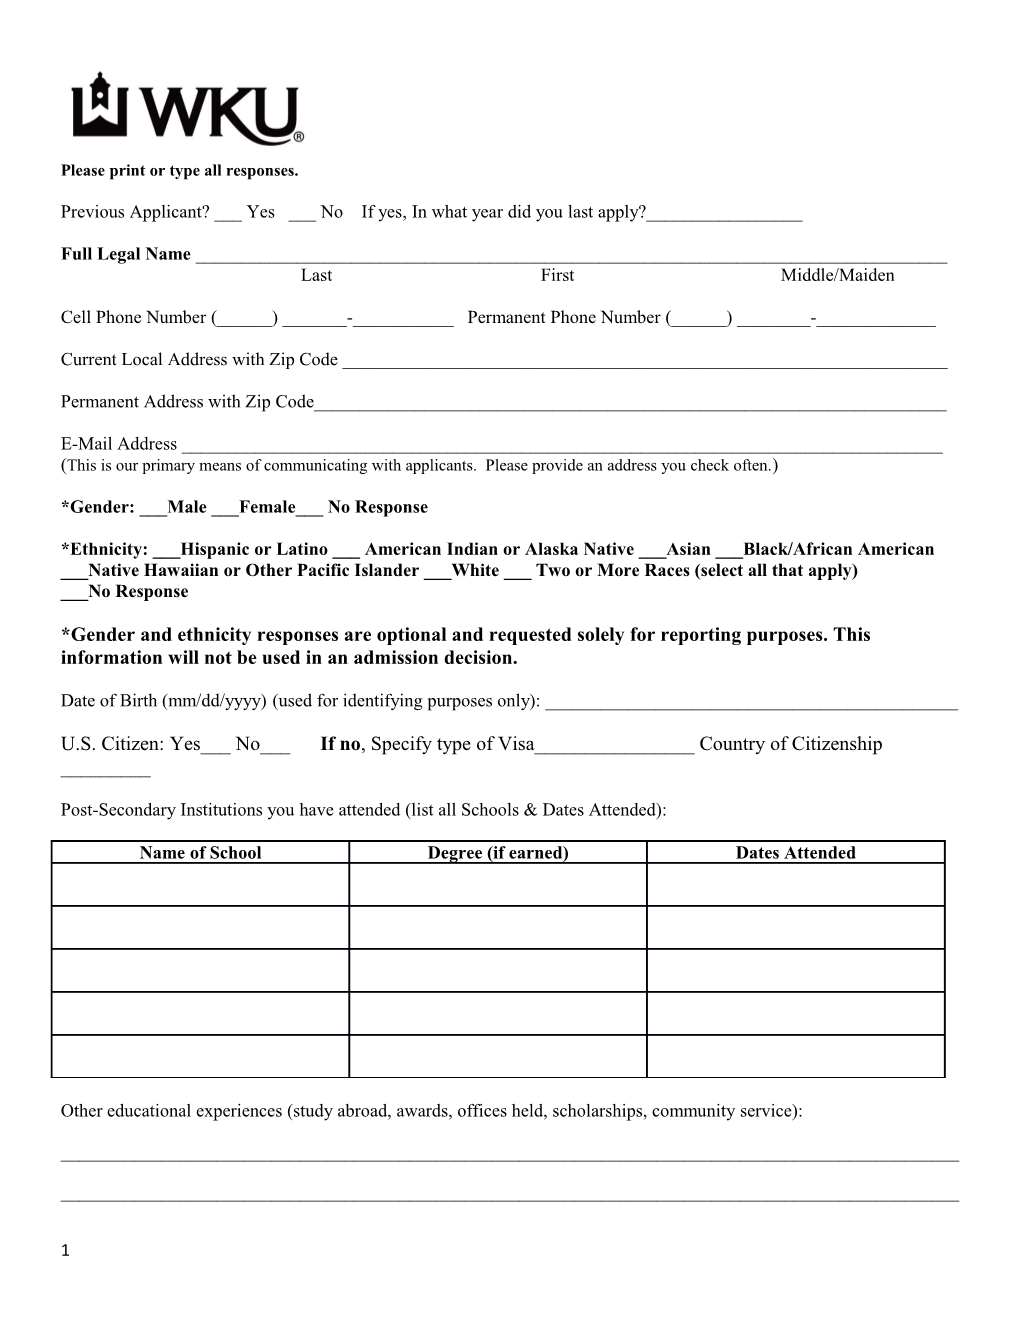 Please Print Or Type All Responses